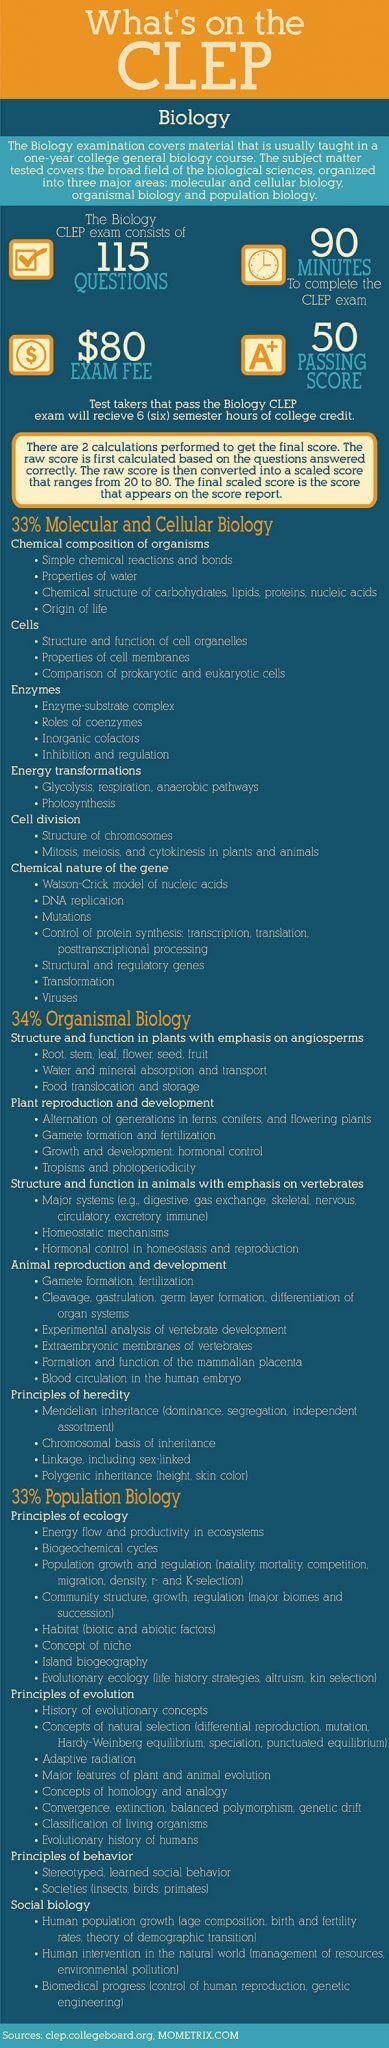 Infographic explaining what is on the Biology CLEP test